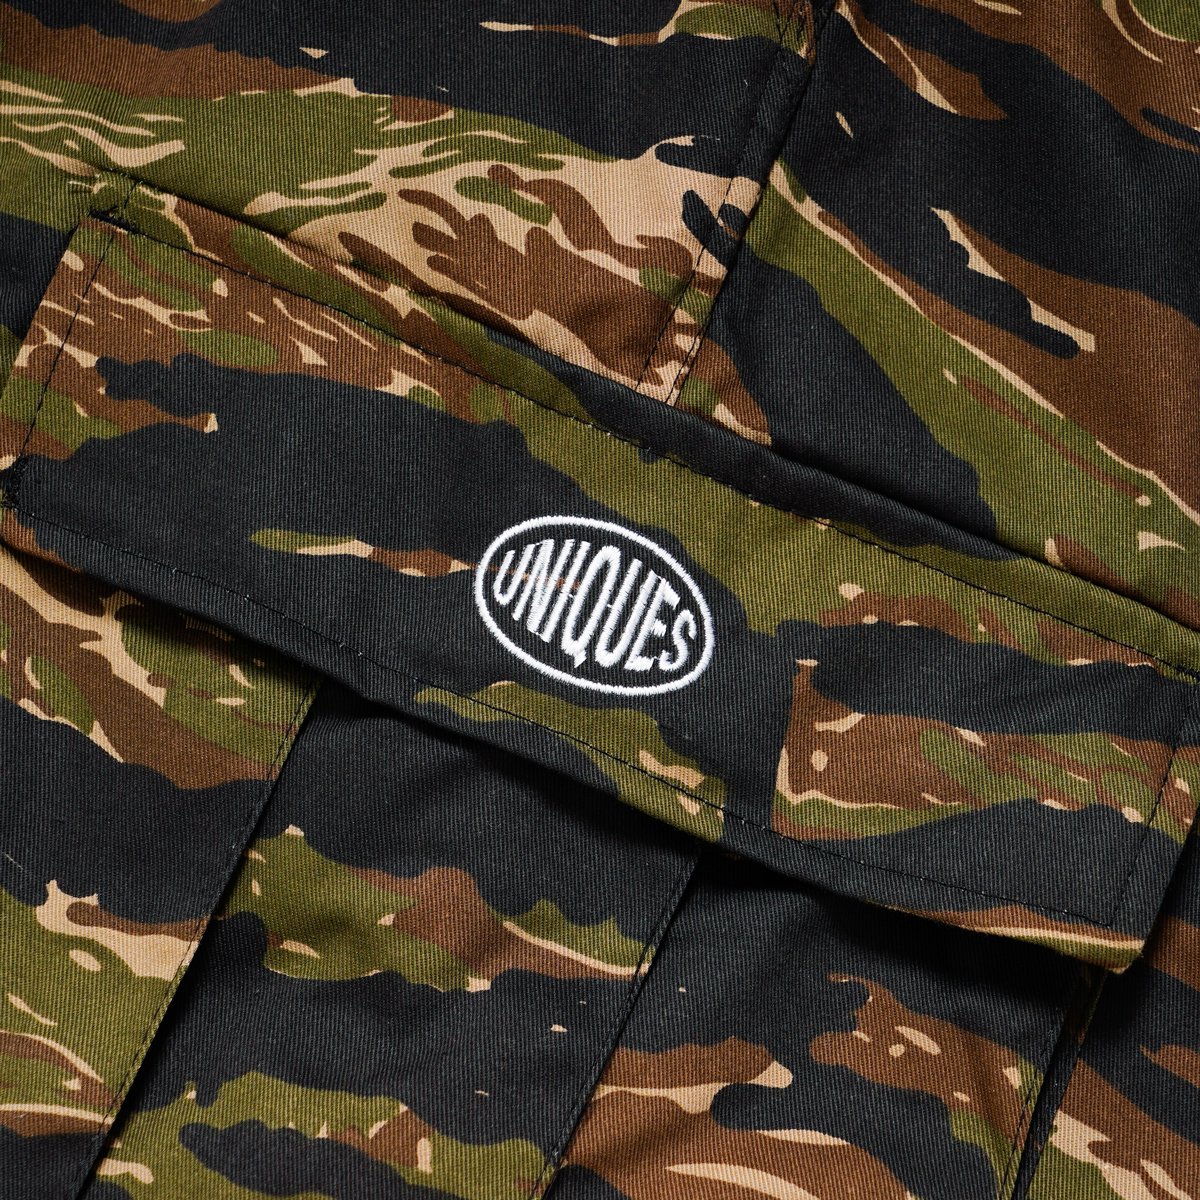 Uniques / Military BDU Pants - TigerCamo - - HighLife Online Store |  ハイライフ公式オンラインストア